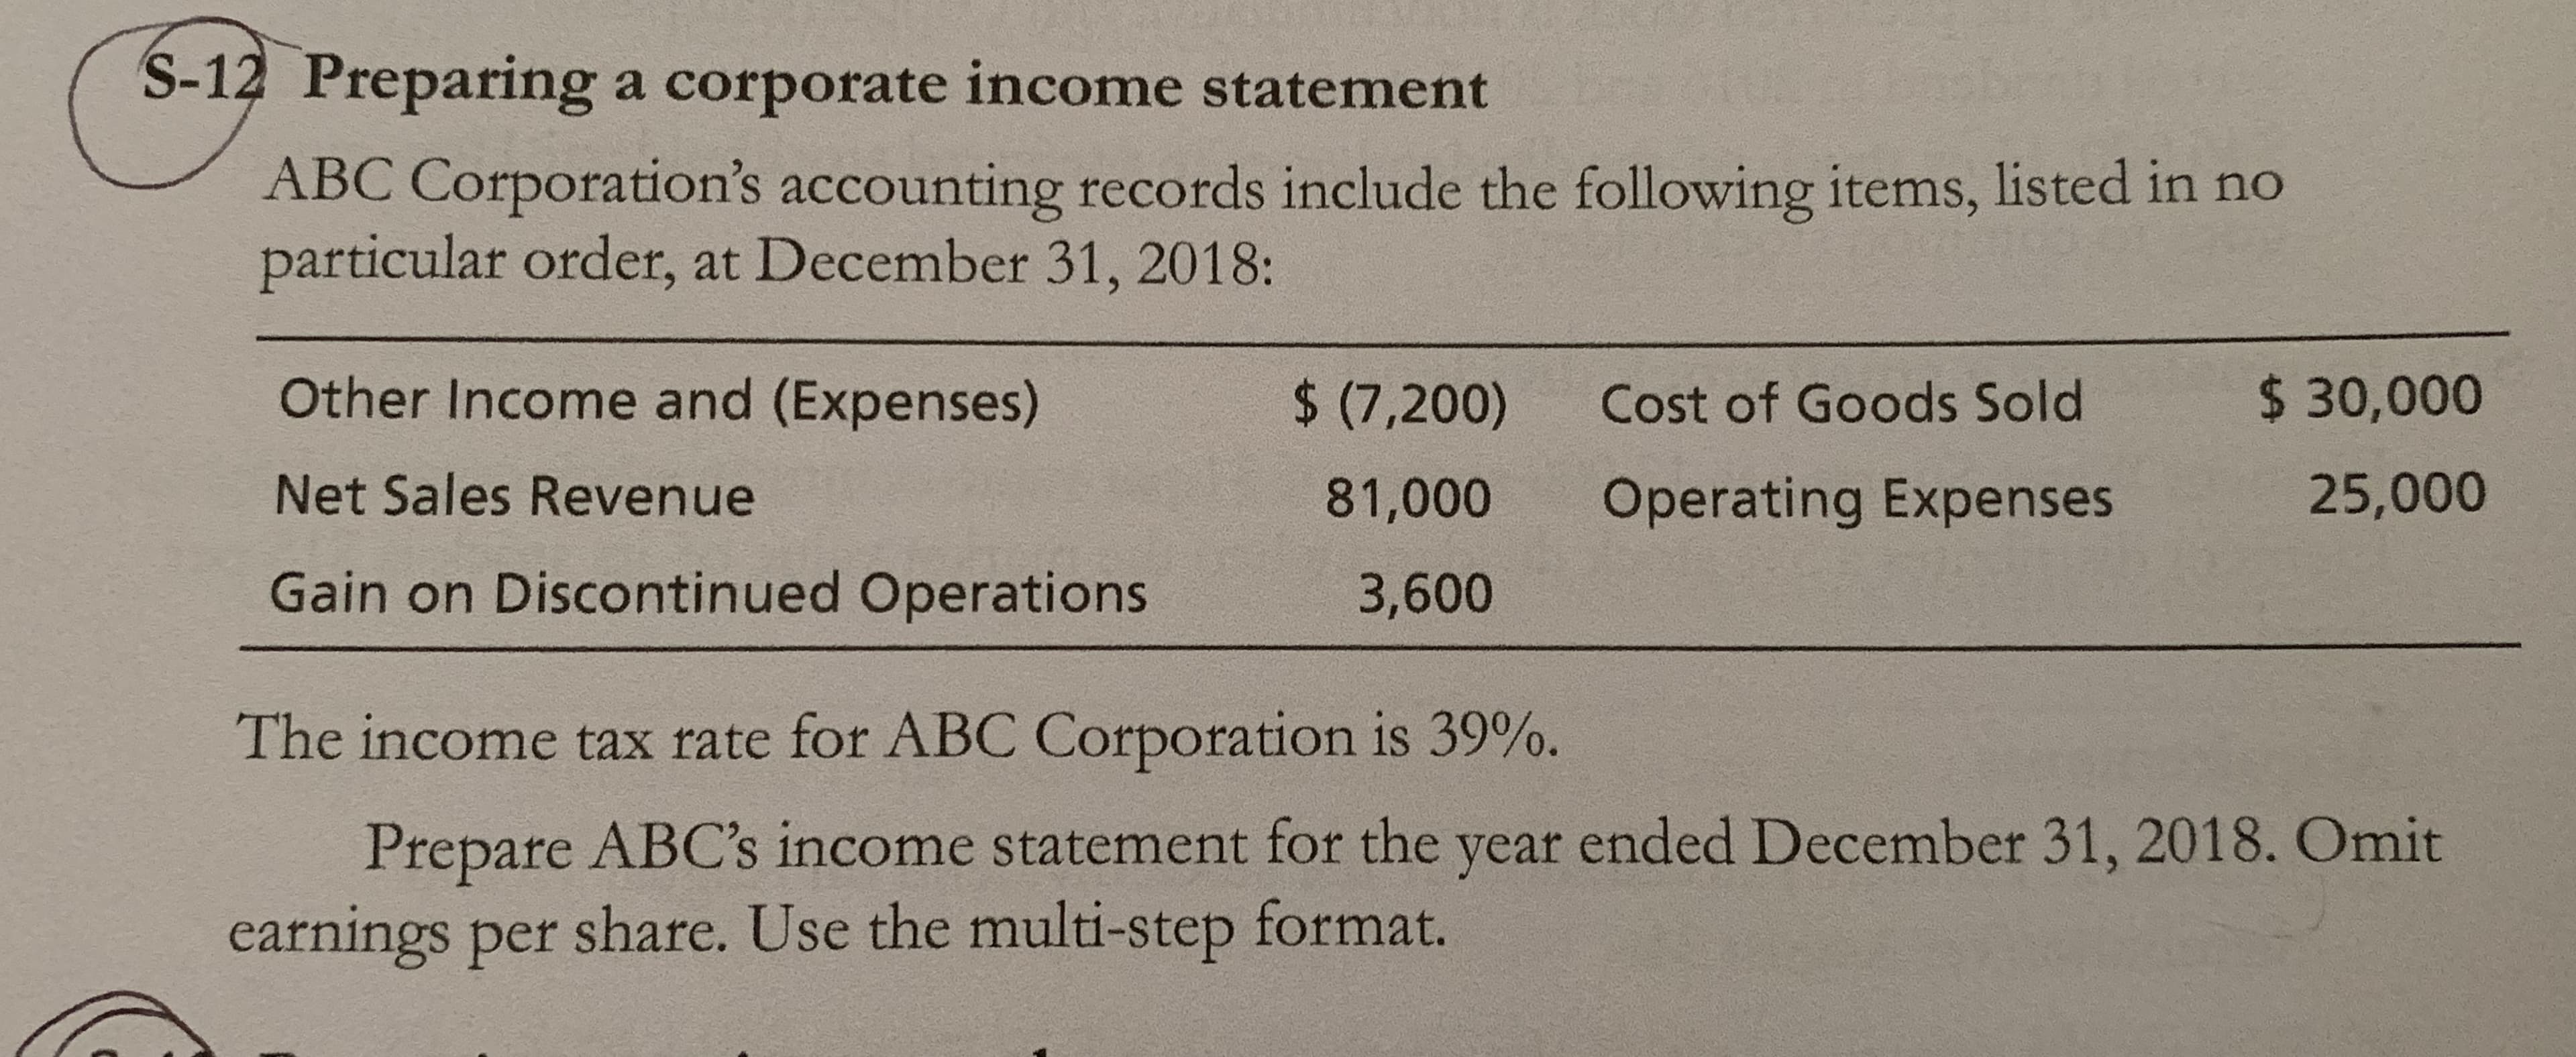 Prepare ABC's income statement for the year ended December 31, 2018. Omit
earnings per share. Use the multi-step format.
